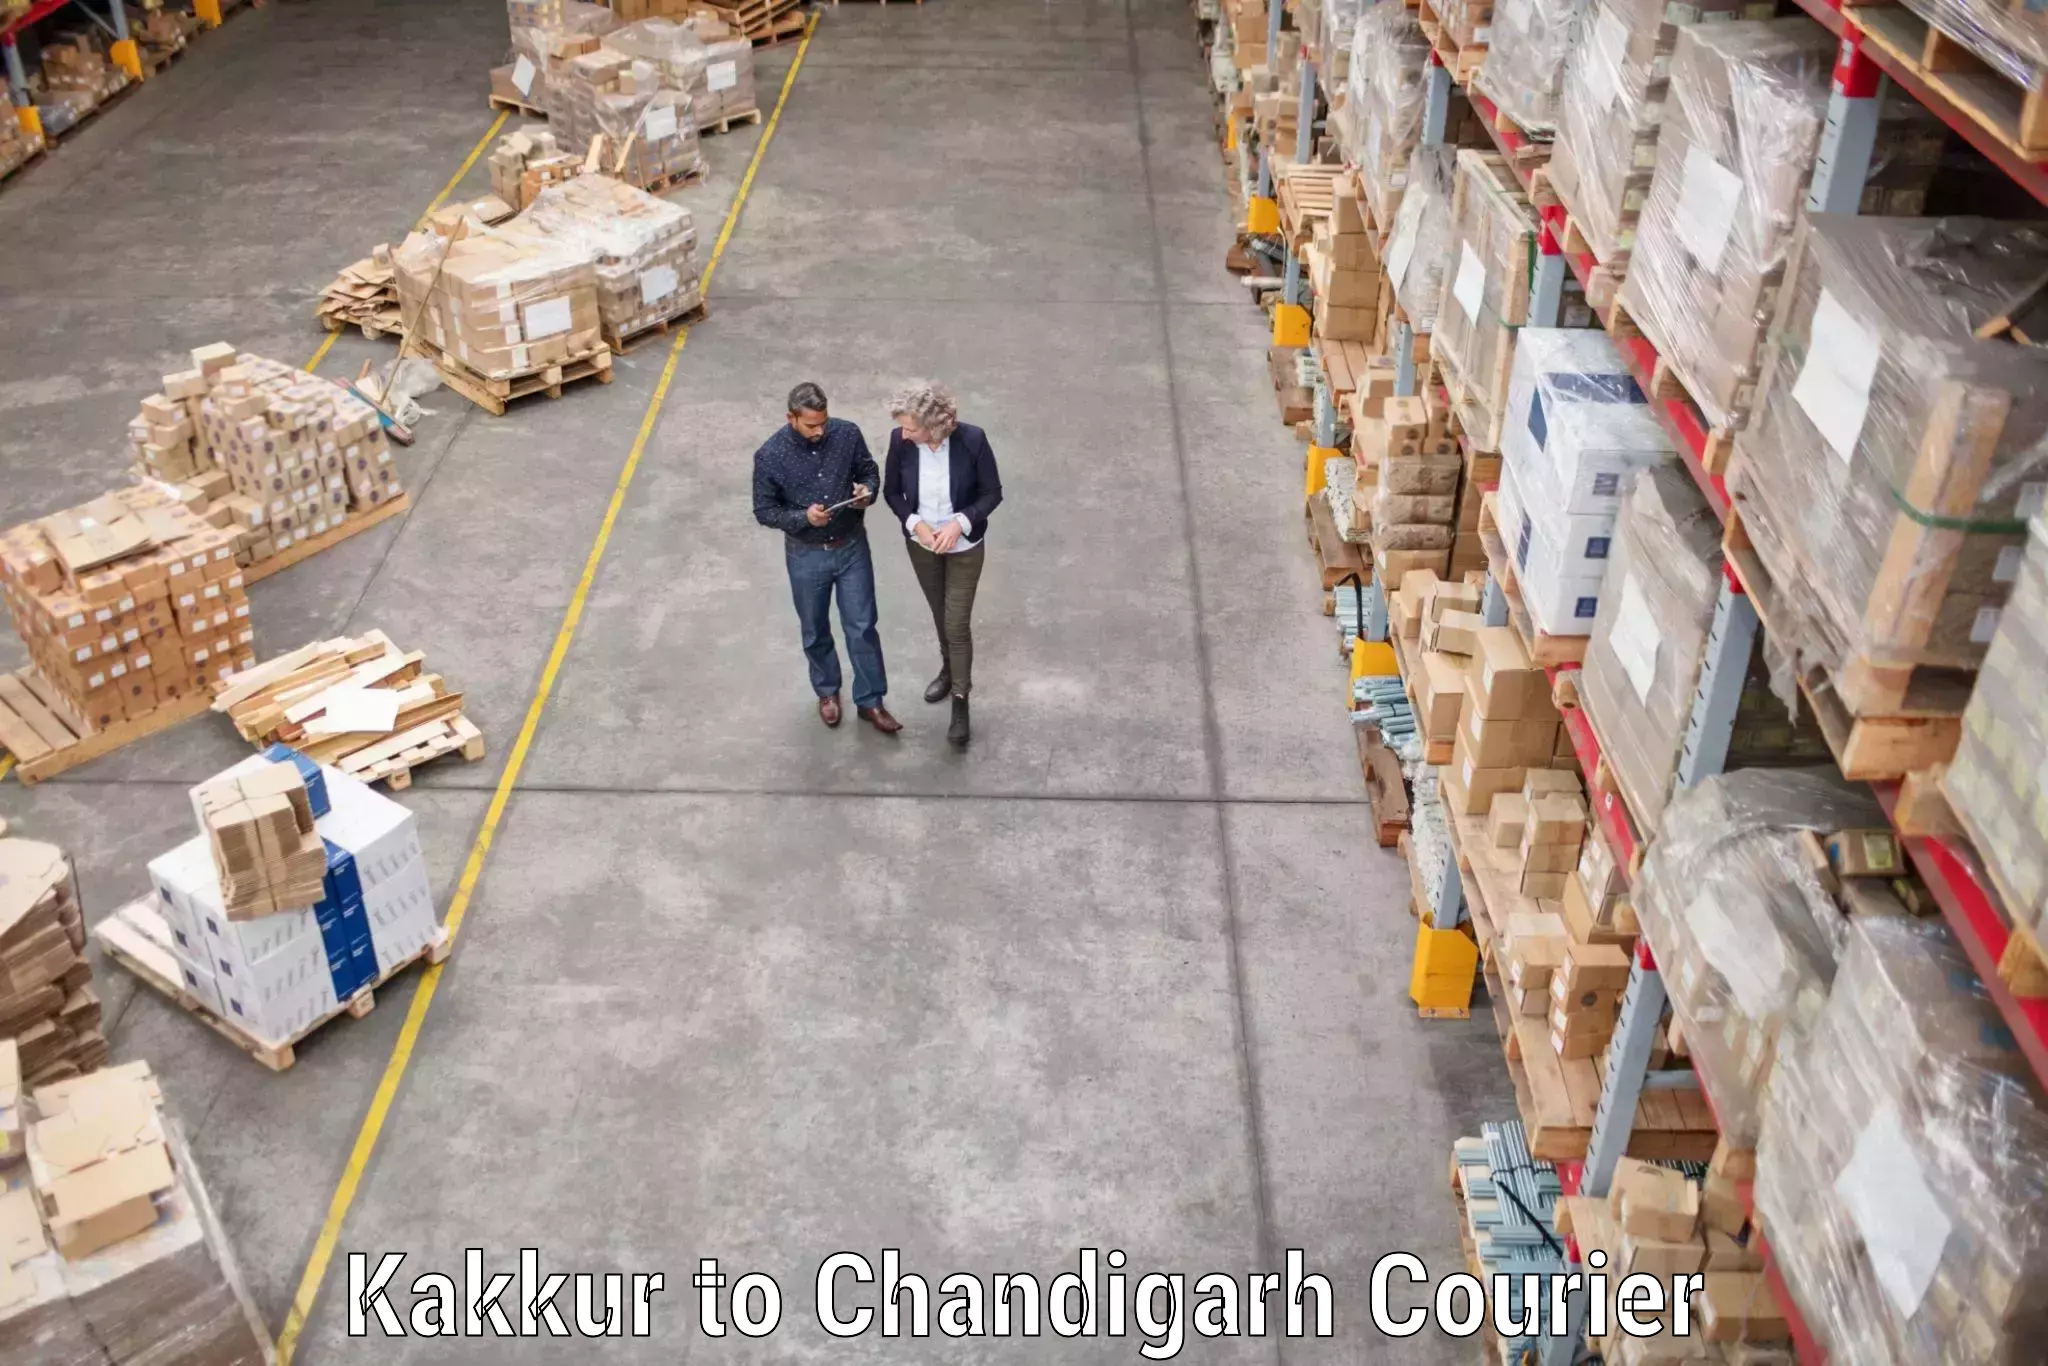 Trusted relocation experts Kakkur to Chandigarh